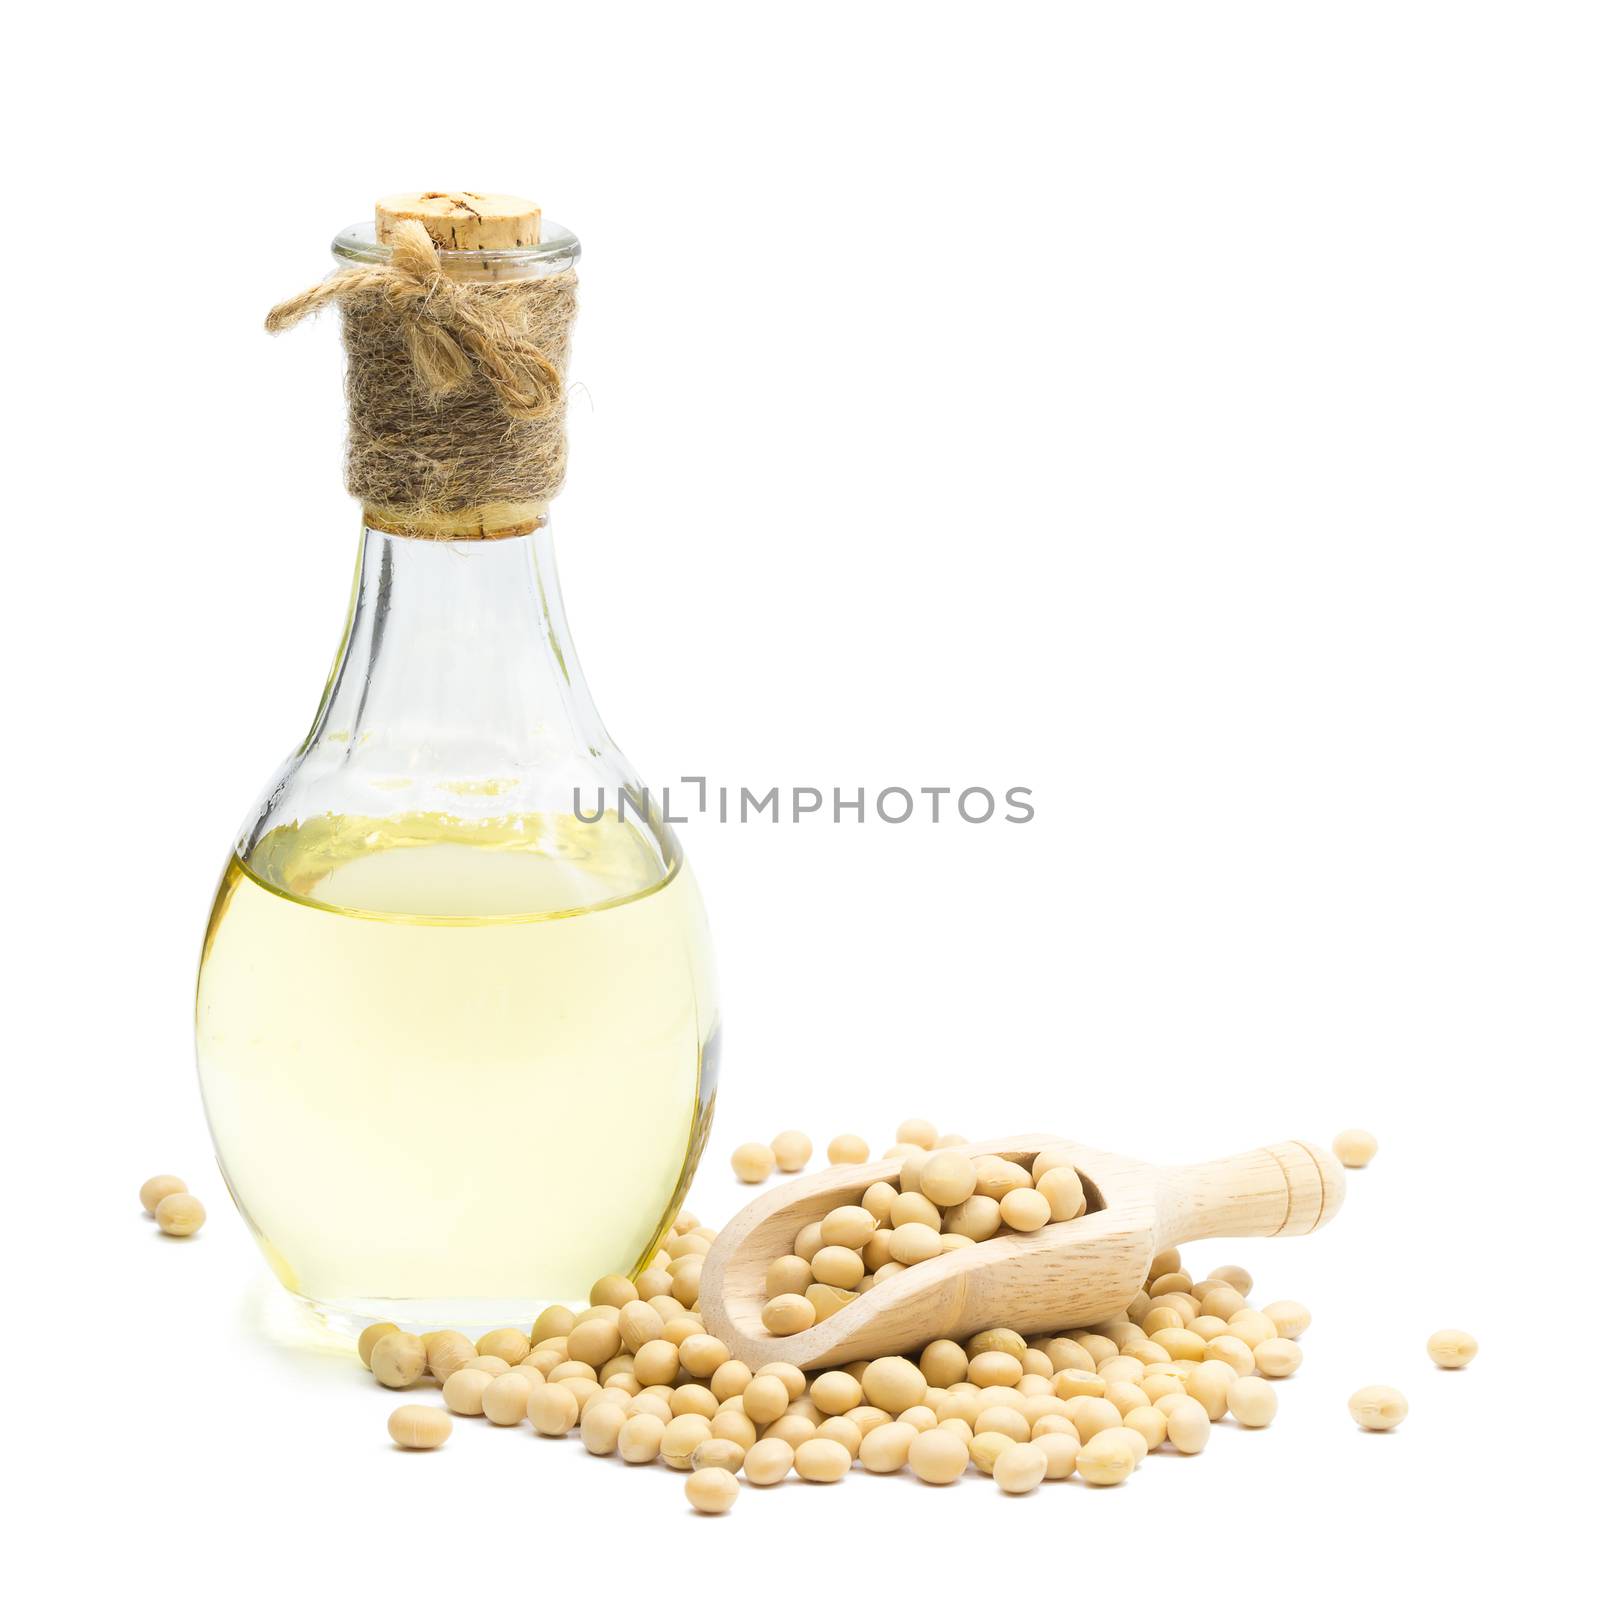 Soybean and Soybean oil bottle isolated on white background.